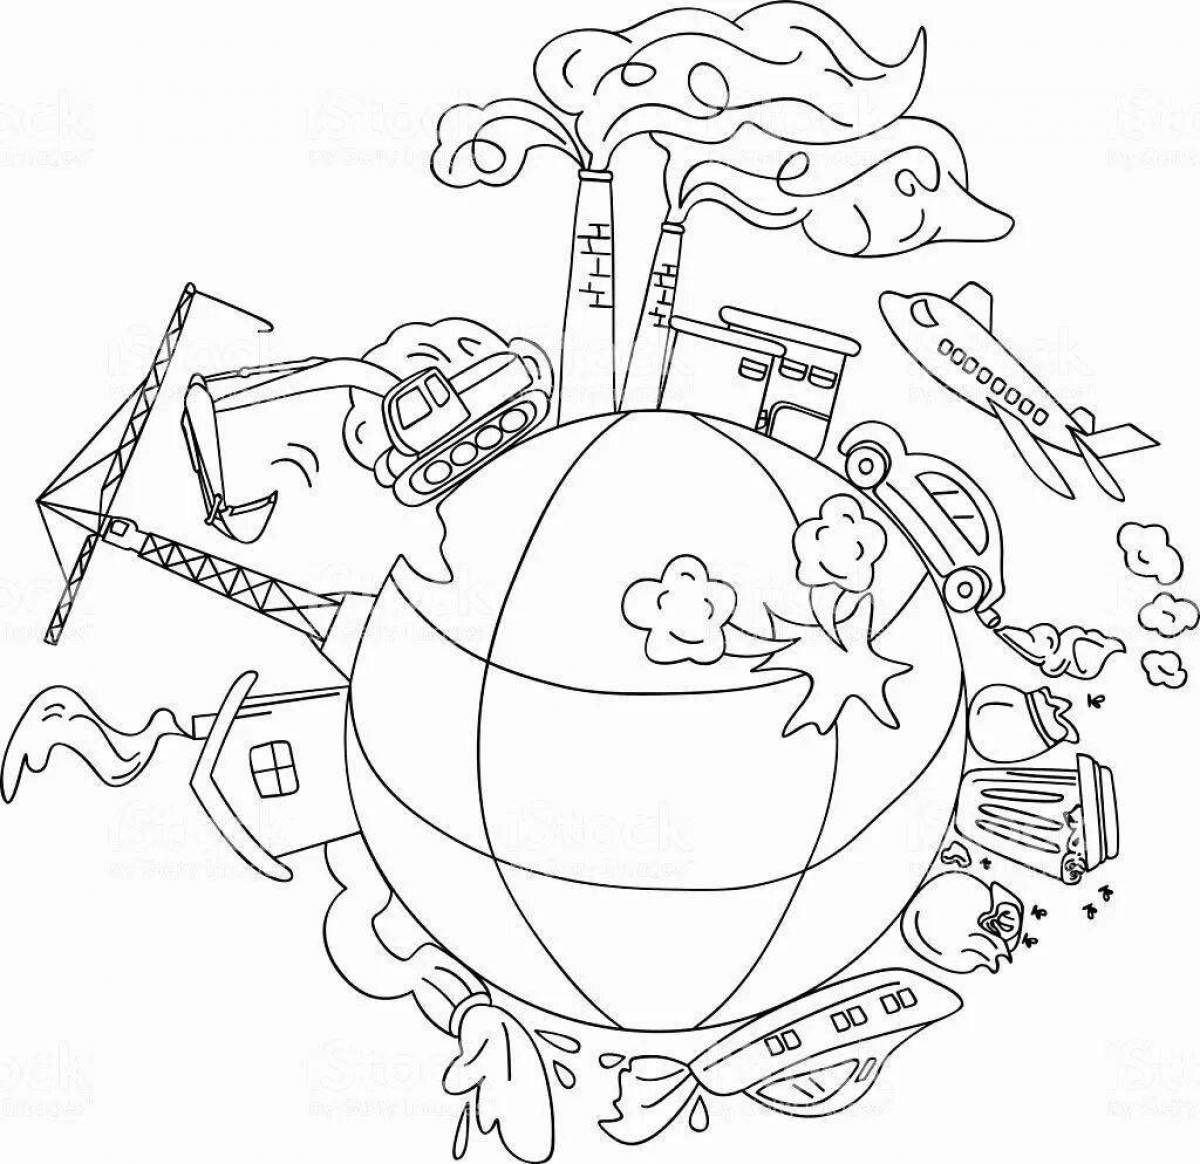 Exciting environmental poster coloring page